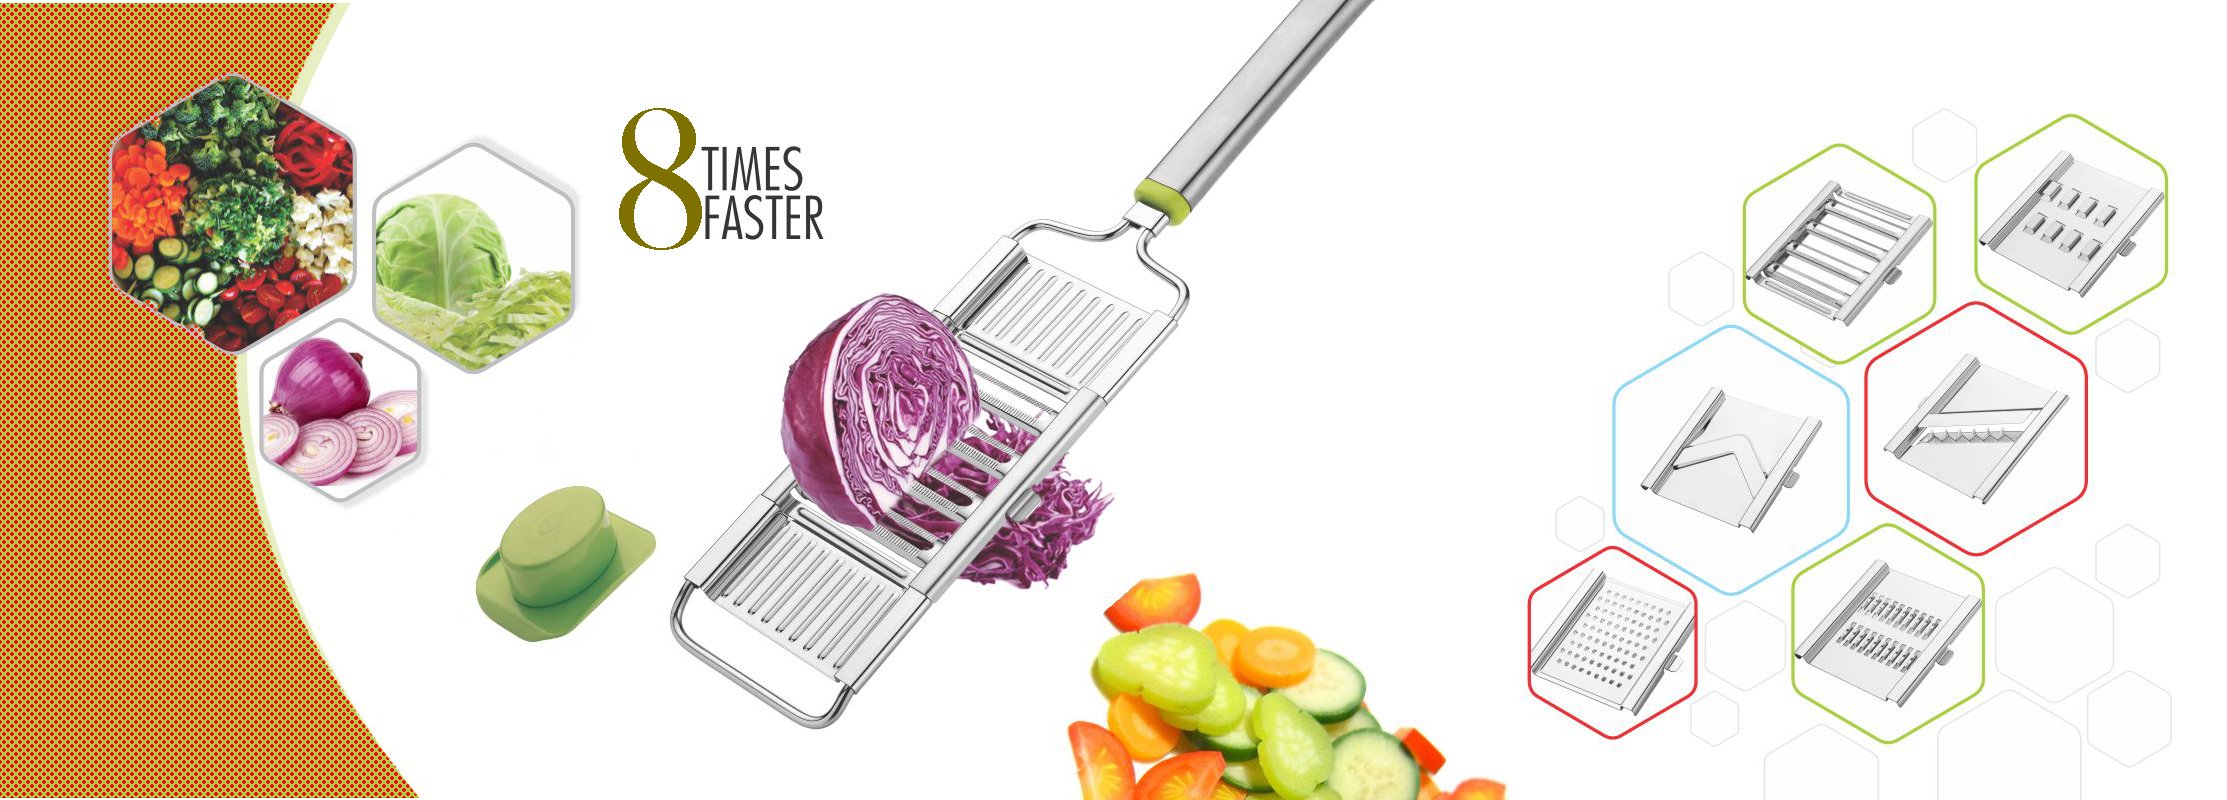 2142 6 in 1 Stainless Steel Kitchen Chips Chopper Cutter Slicer and Grater with Handle - SkyShopy